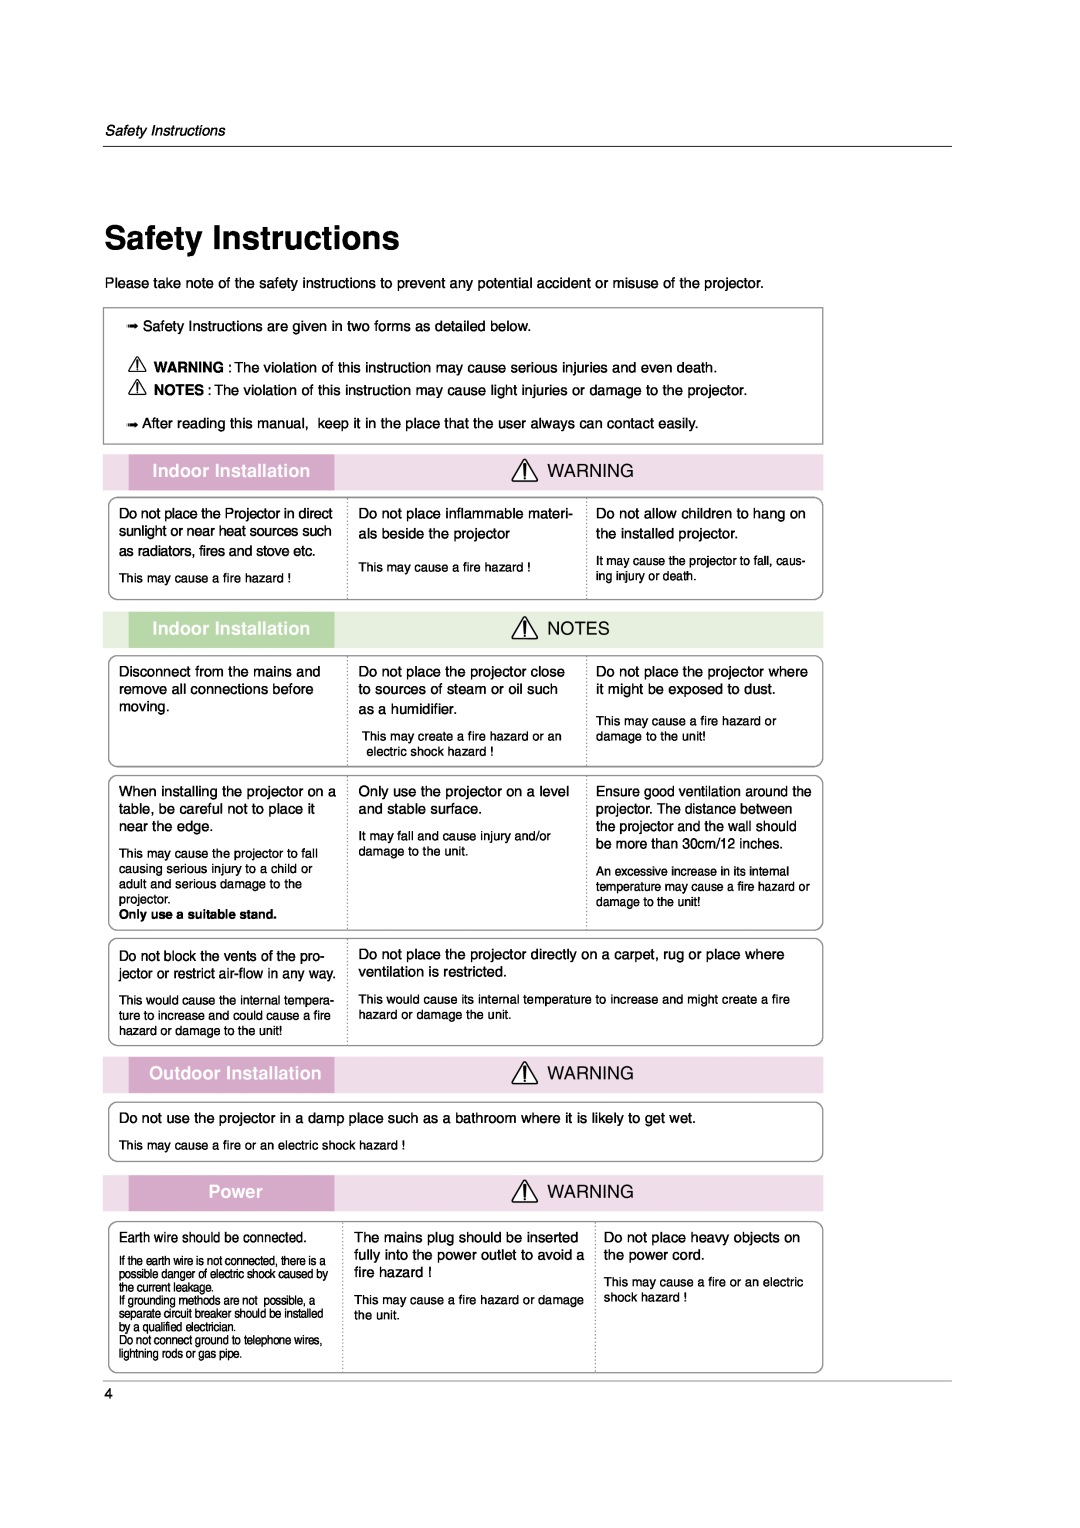 LG Electronics HS102 owner manual Safety Instructions, Indoor Installation, Outdoor Installation, Power 